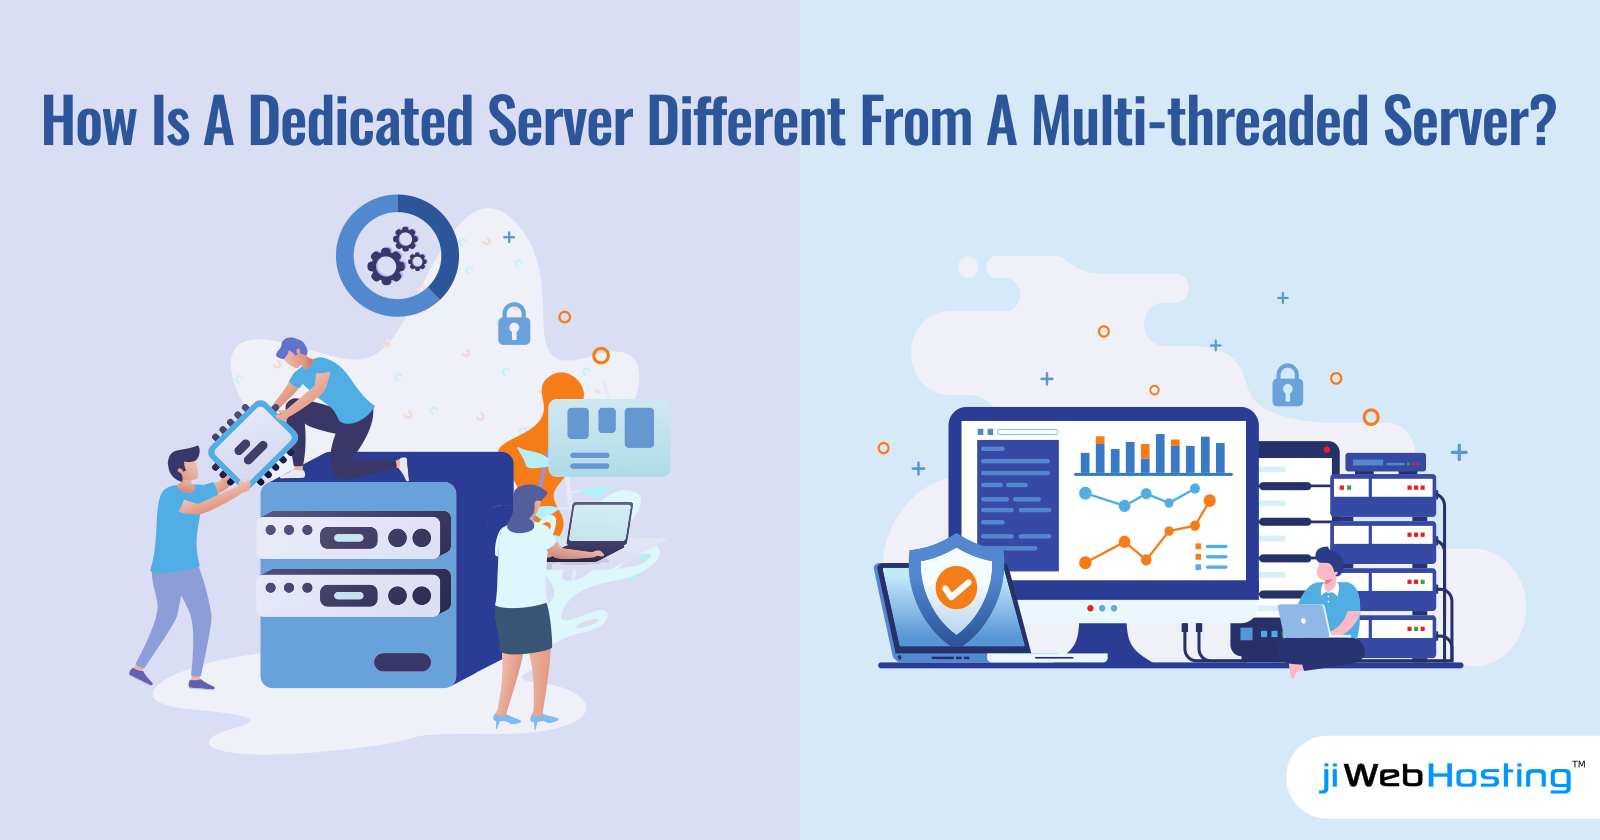 How Is A Dedicated Server Different From A Multi-threaded Server?